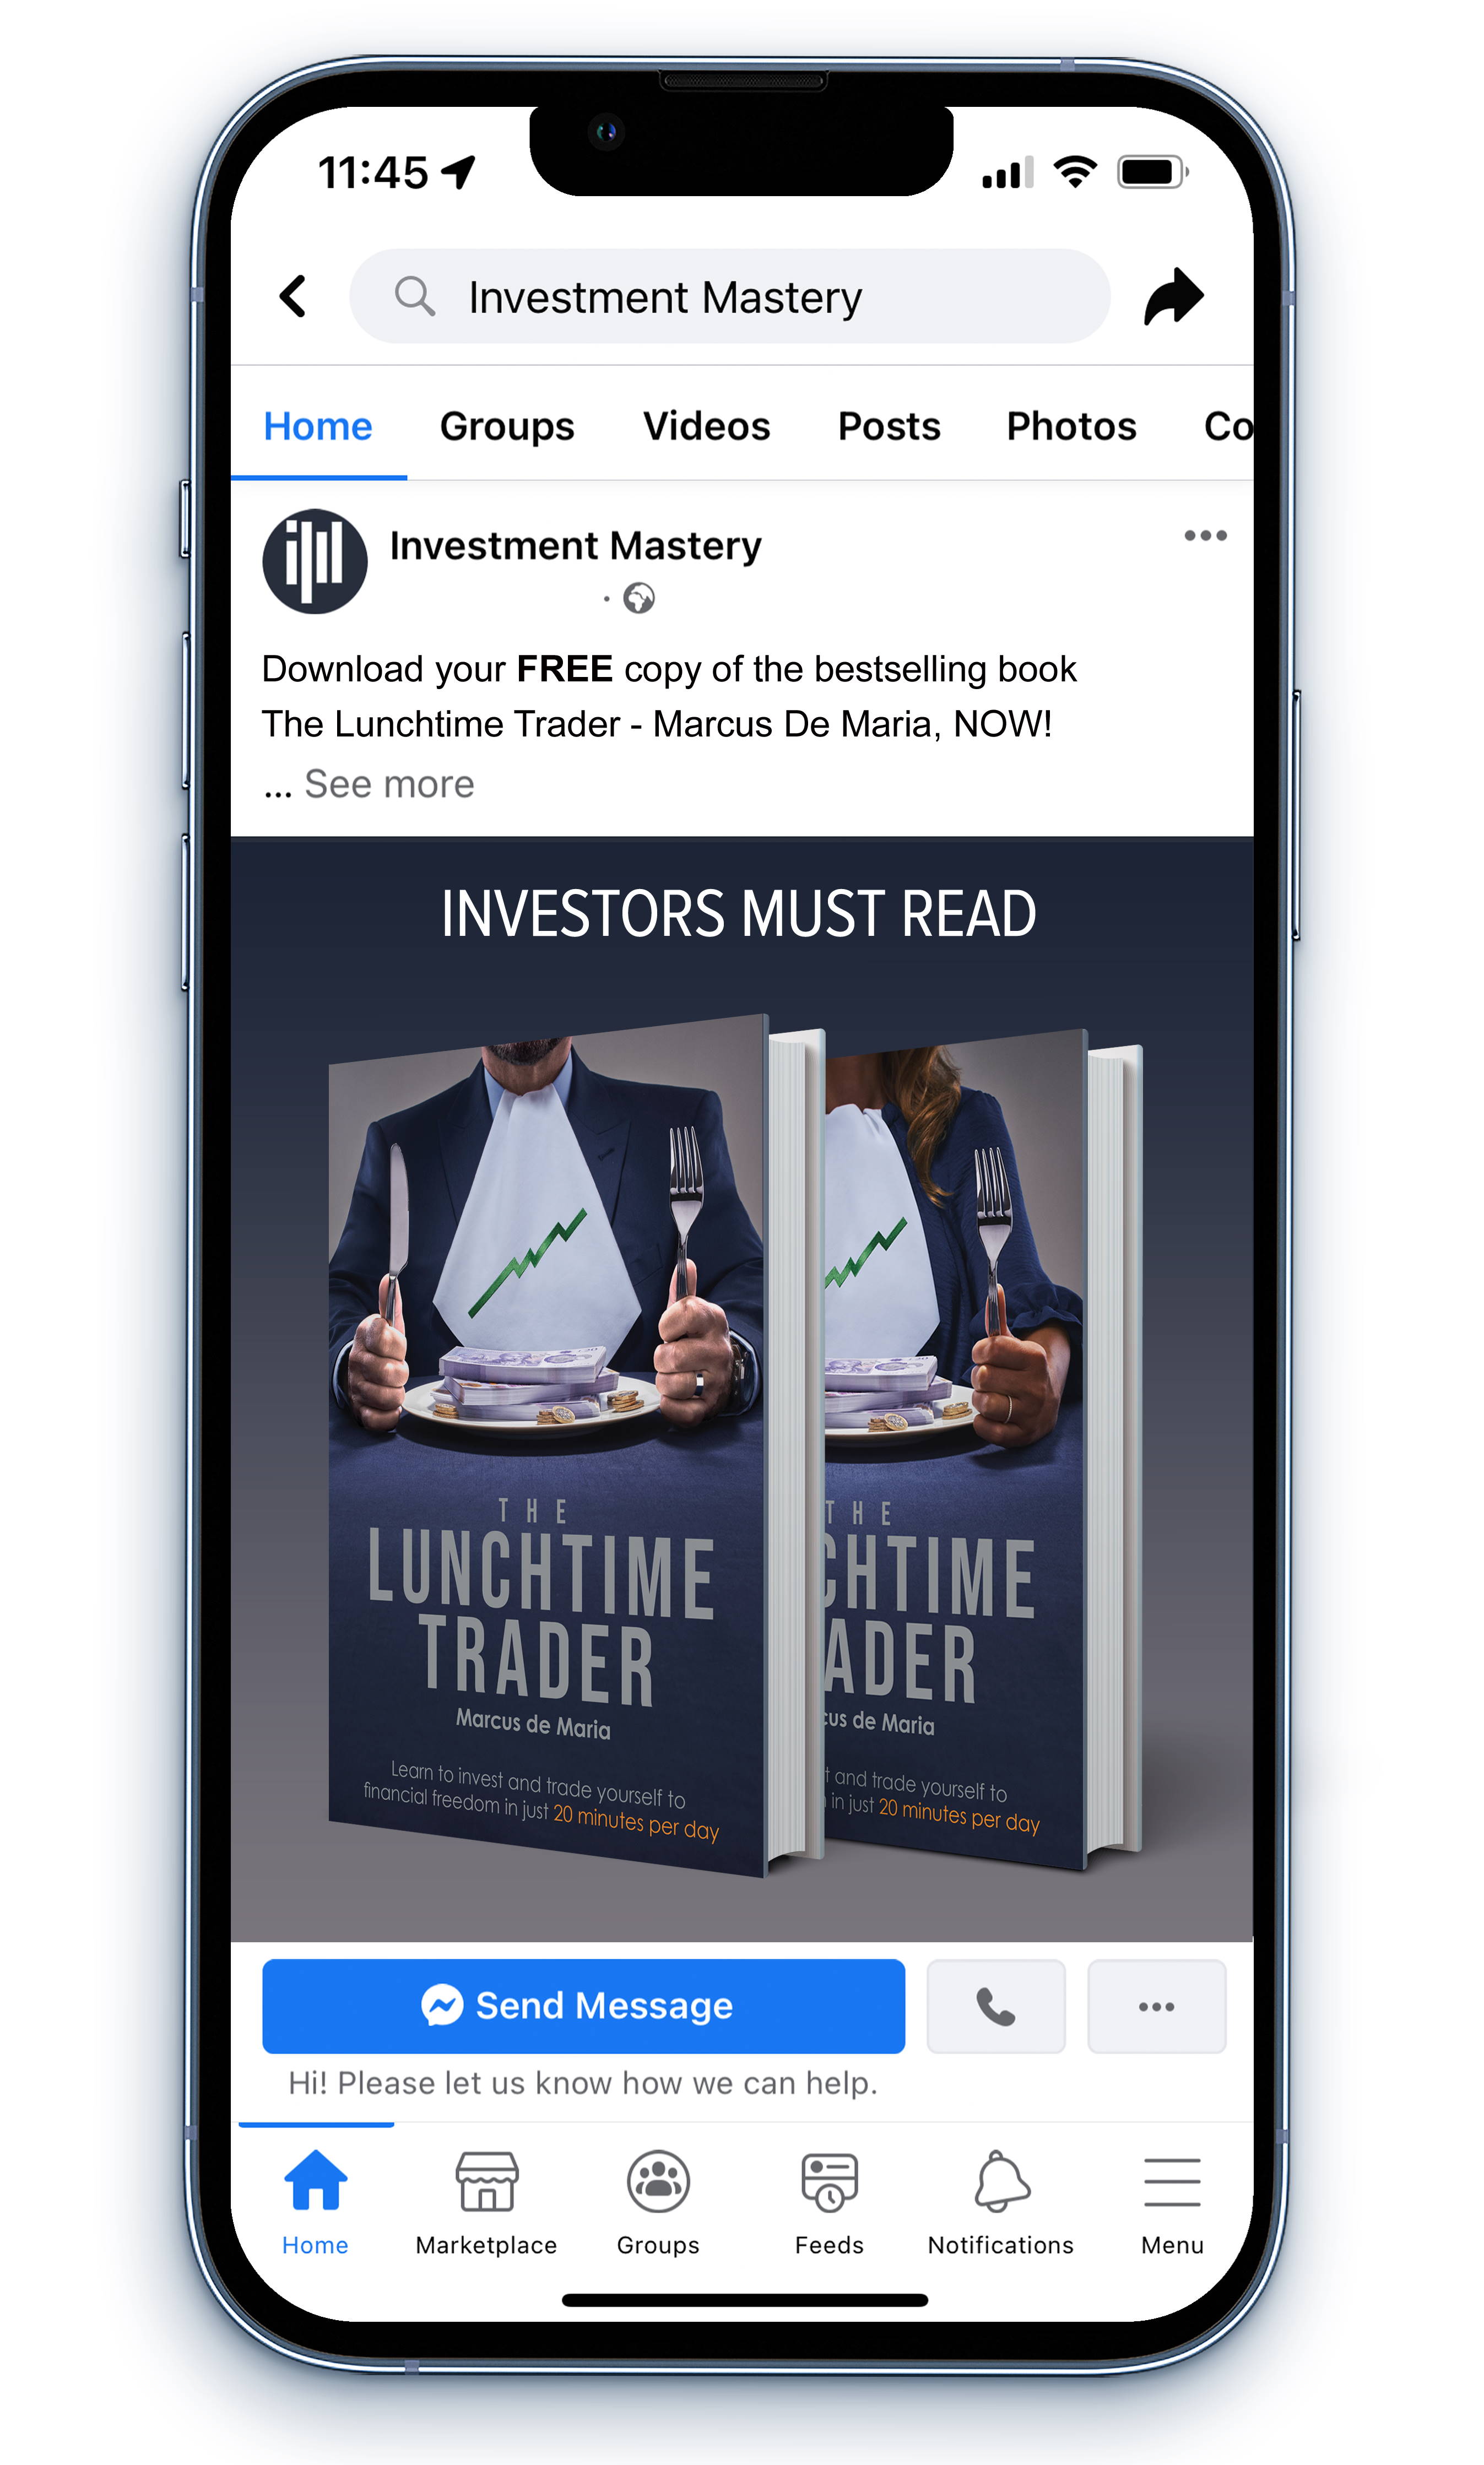 Ads for Investment Mastery's eBook, The Lunchtime Trader, on an iPhone